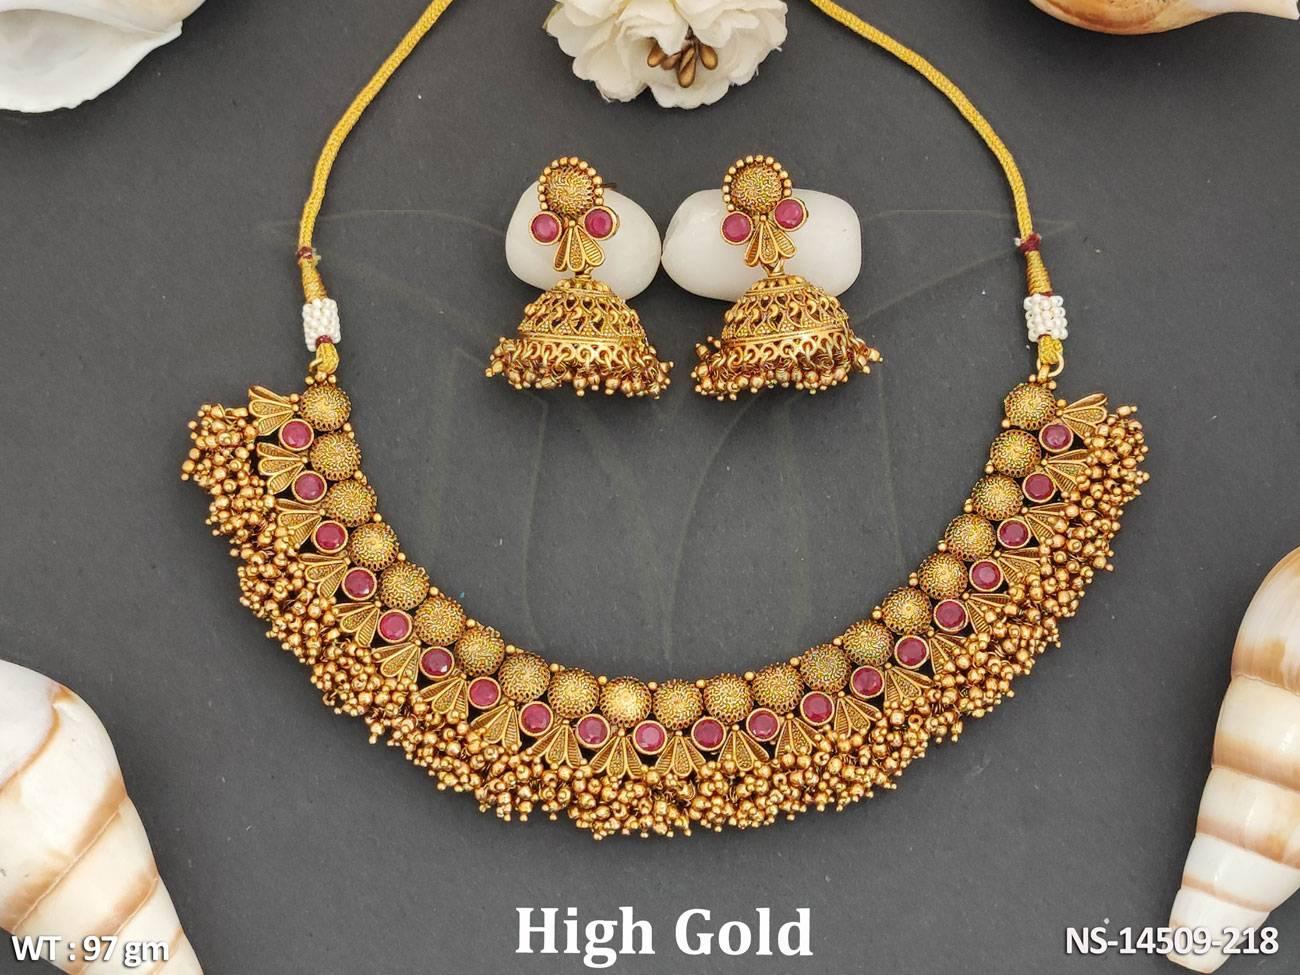 This Antique Jewellery High Gold Polish Clustered Pearl Fancy Style Necklace Set boasts a stunning design with high gold polish and clustered pearls.